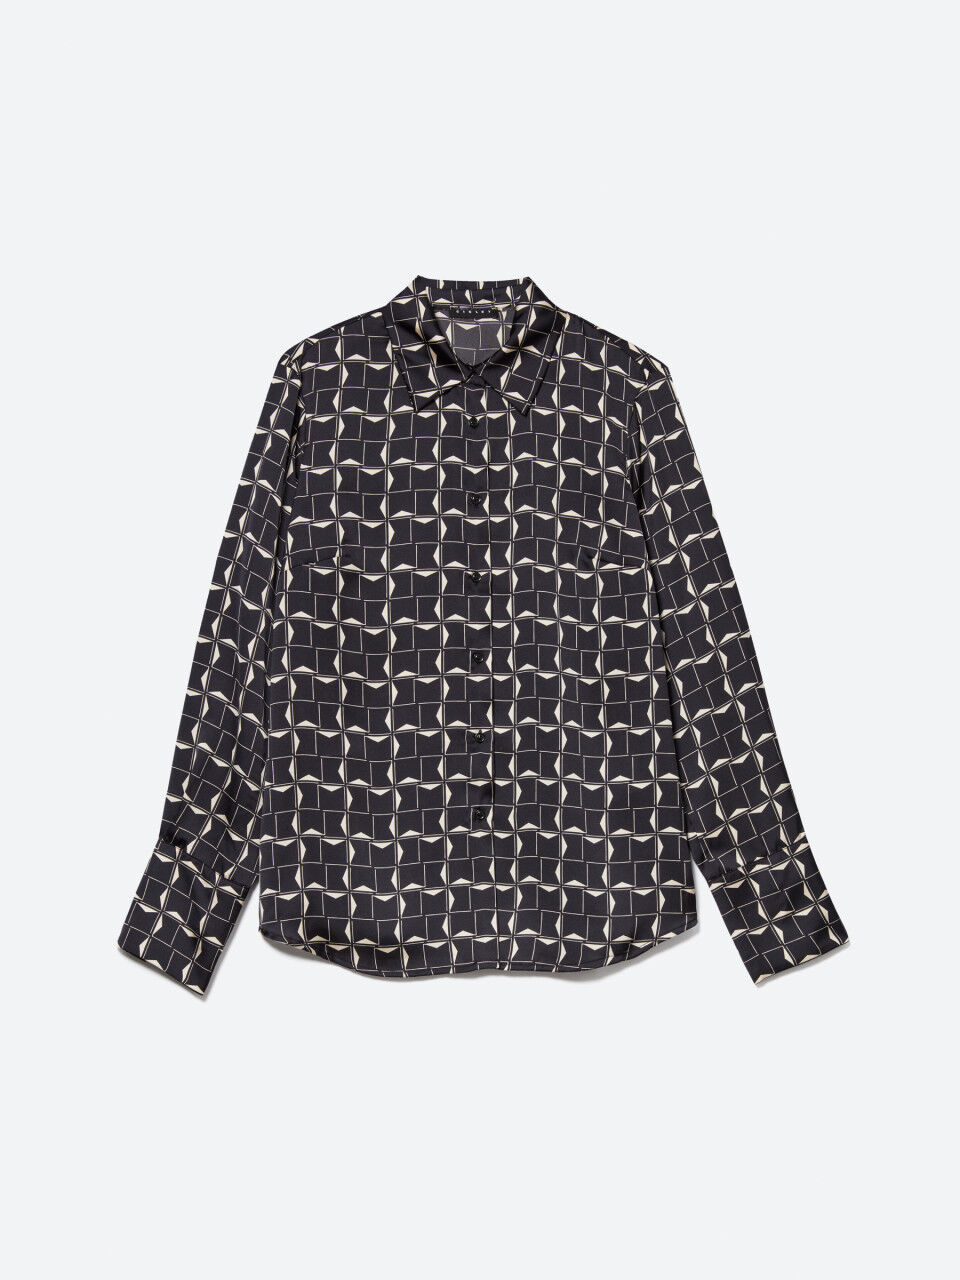 Women's Shirts and Blouses 2022 Collection | Sisley World